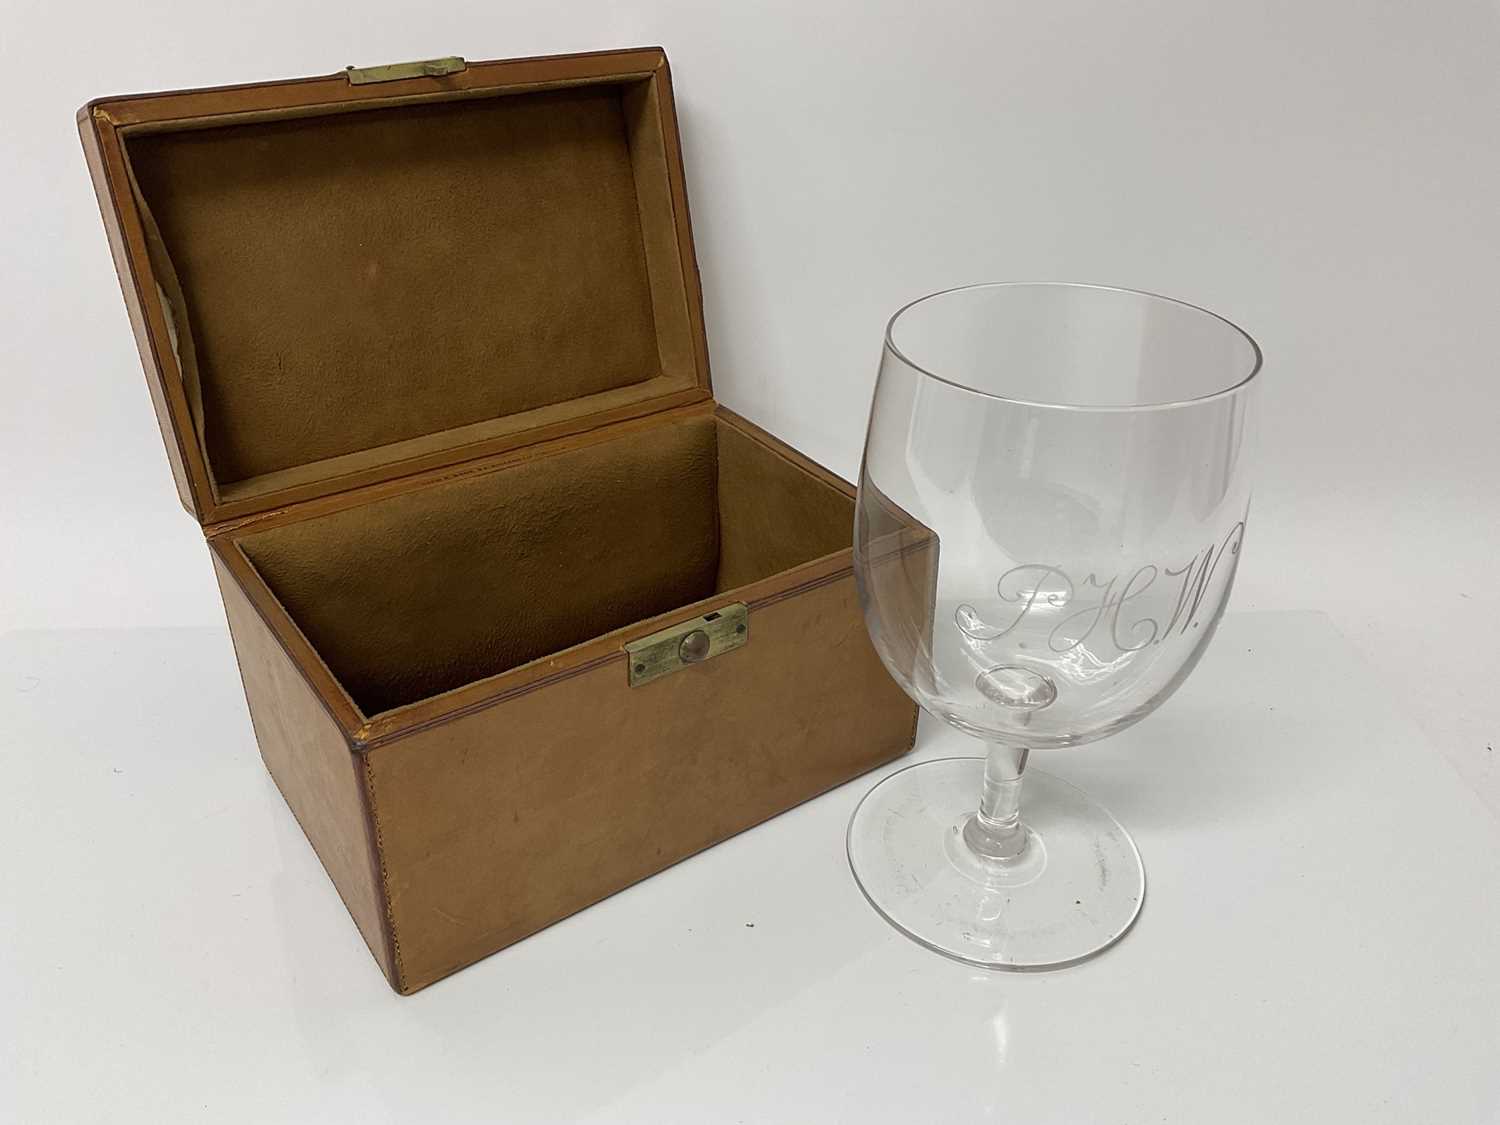 Lot 114 - Drew & Sons brown leather case containing a good quality glass goblet with engraved initials, P.H.W.